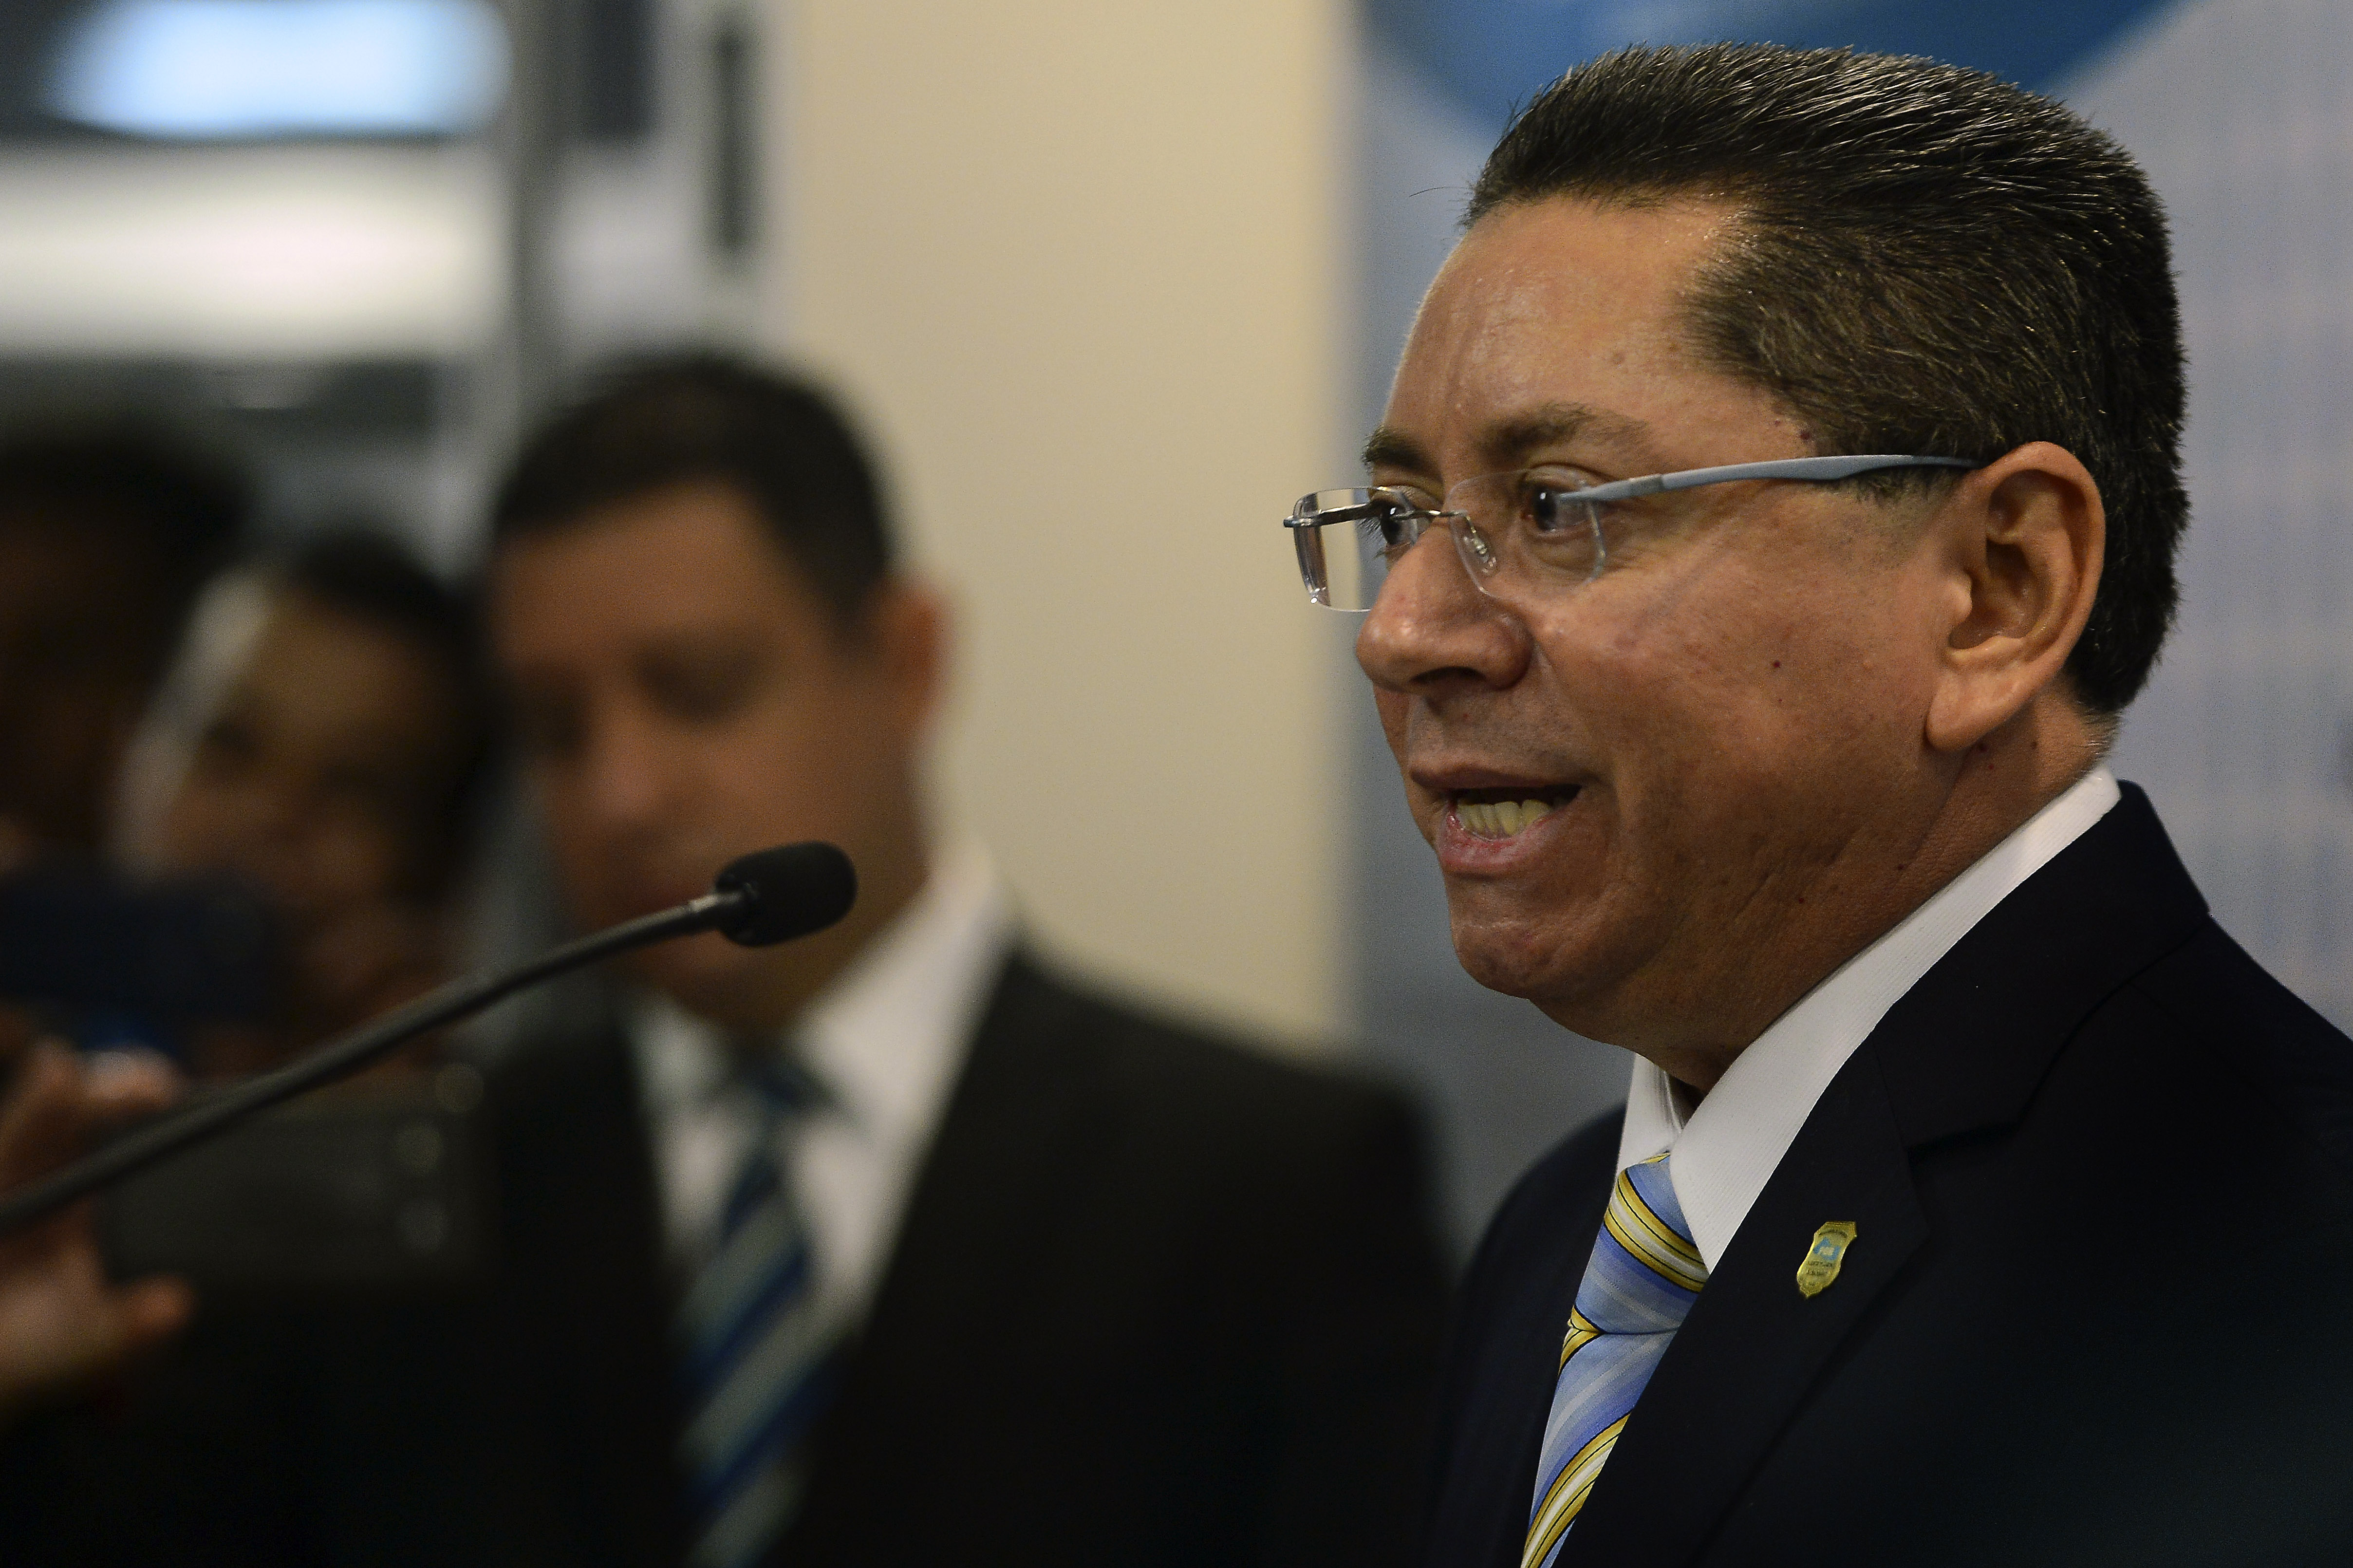 The new Prosecutor General of El Salvador, Douglas Arquimedes Melendez speaks during a press conference in San Salvador, on January 6, 2016. Melendez takes over as prosecutor general amid a social crisis provoked by an alarming increase in the number of murders, and which places Salvador as one of the most violent countries in Latin America.   AFP PHOTO / Marvin RECINOS / AFP / Marvin RECINOS        (Photo credit should read MARVIN RECINOS/AFP/Getty Images)